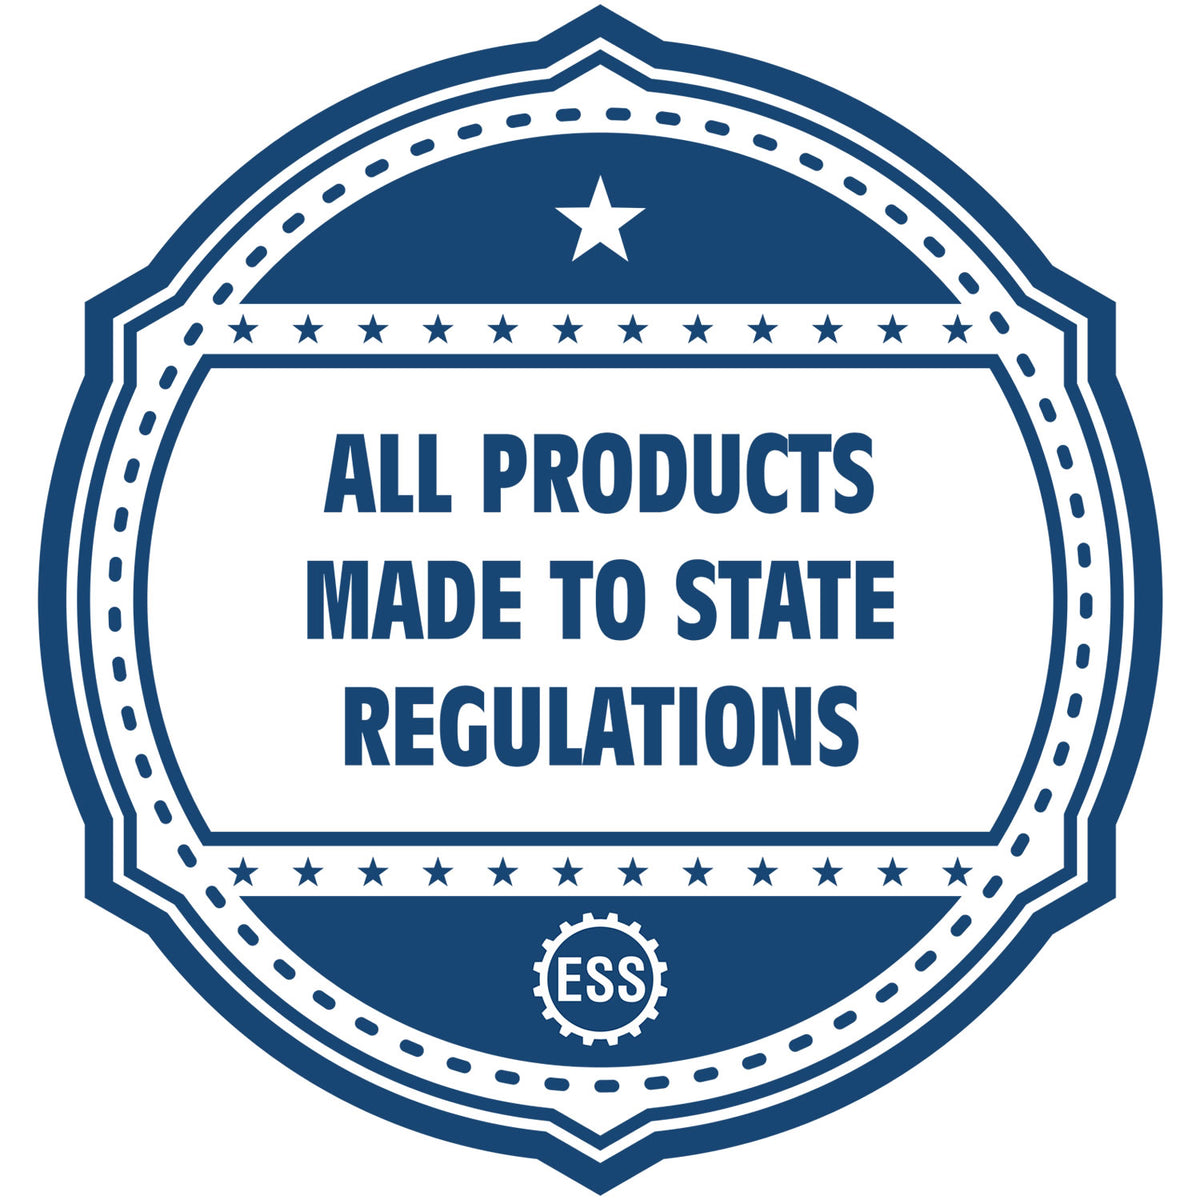 An icon or badge element for the State of Idaho Architectural Seal Embosser showing that this product is made in compliance with state regulations.